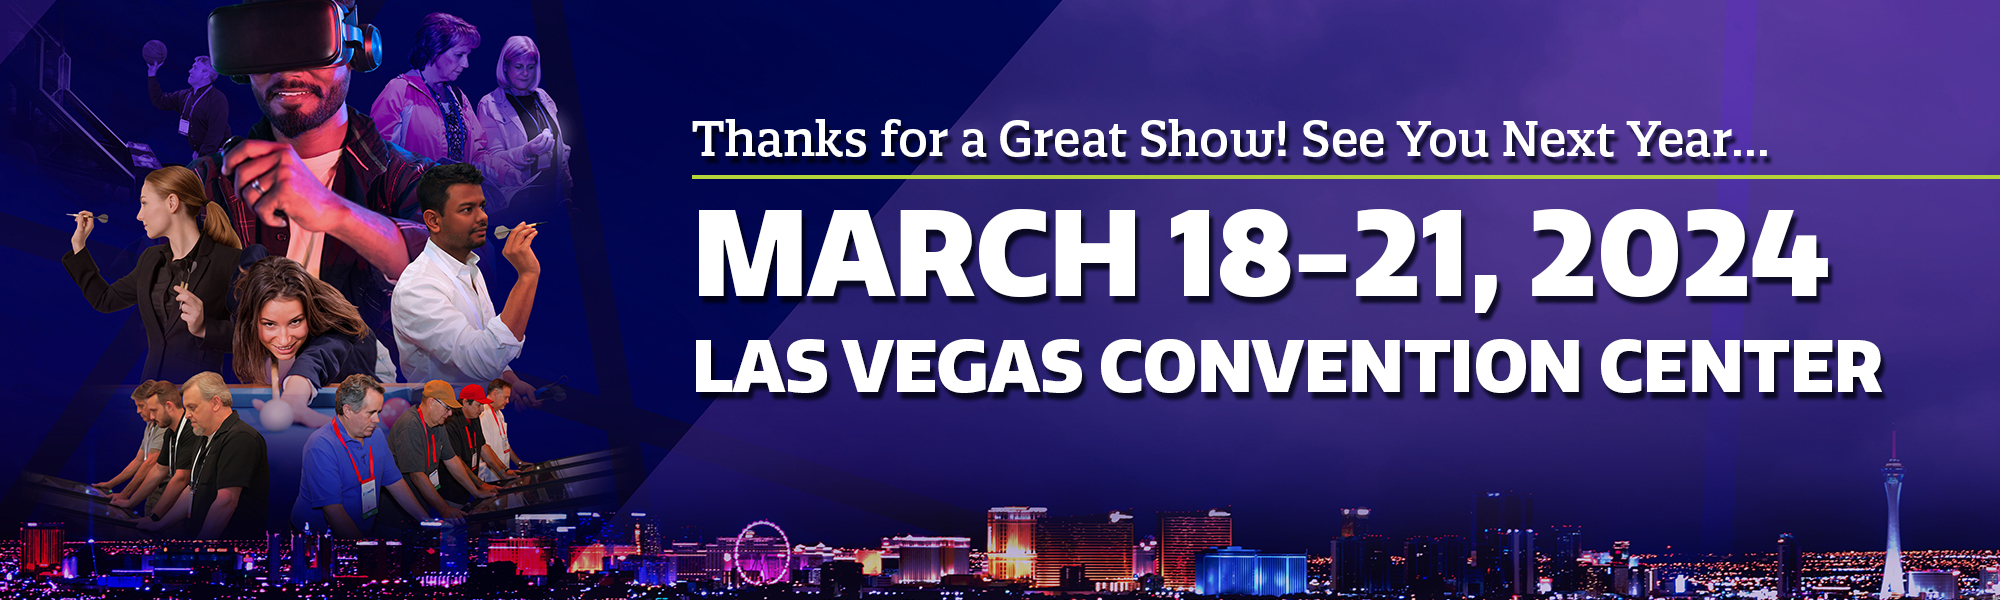 Join Us Next Year March 18-21, 2024 Las Vegas